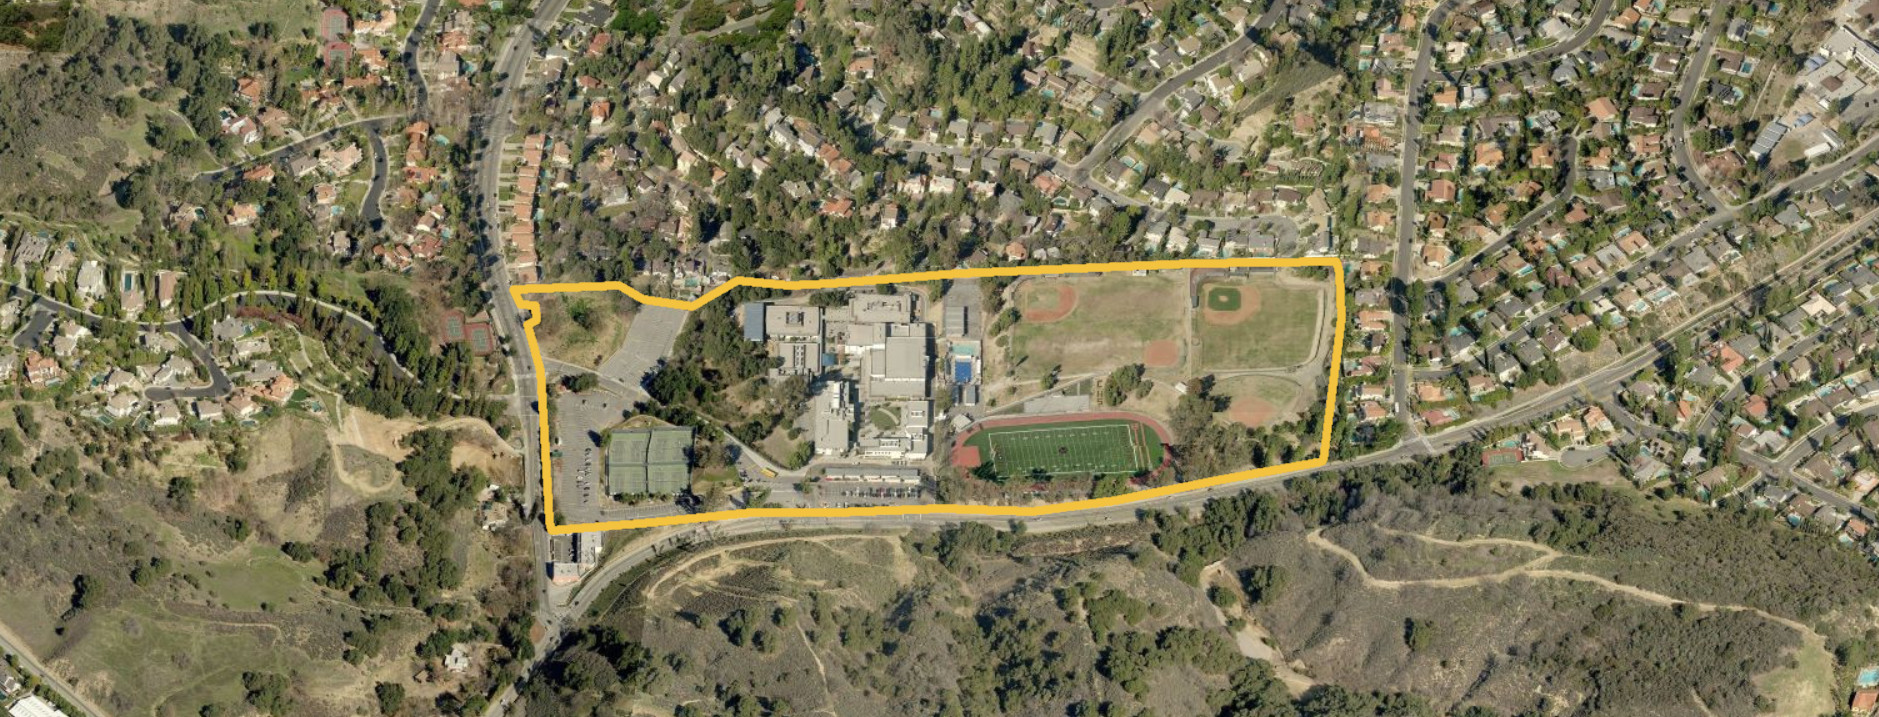 Aerial image of a school taken from the California School Campus Database, the campus includes school buildings, parking lots, ballfields, tennis courts, a football field, track and open areas.